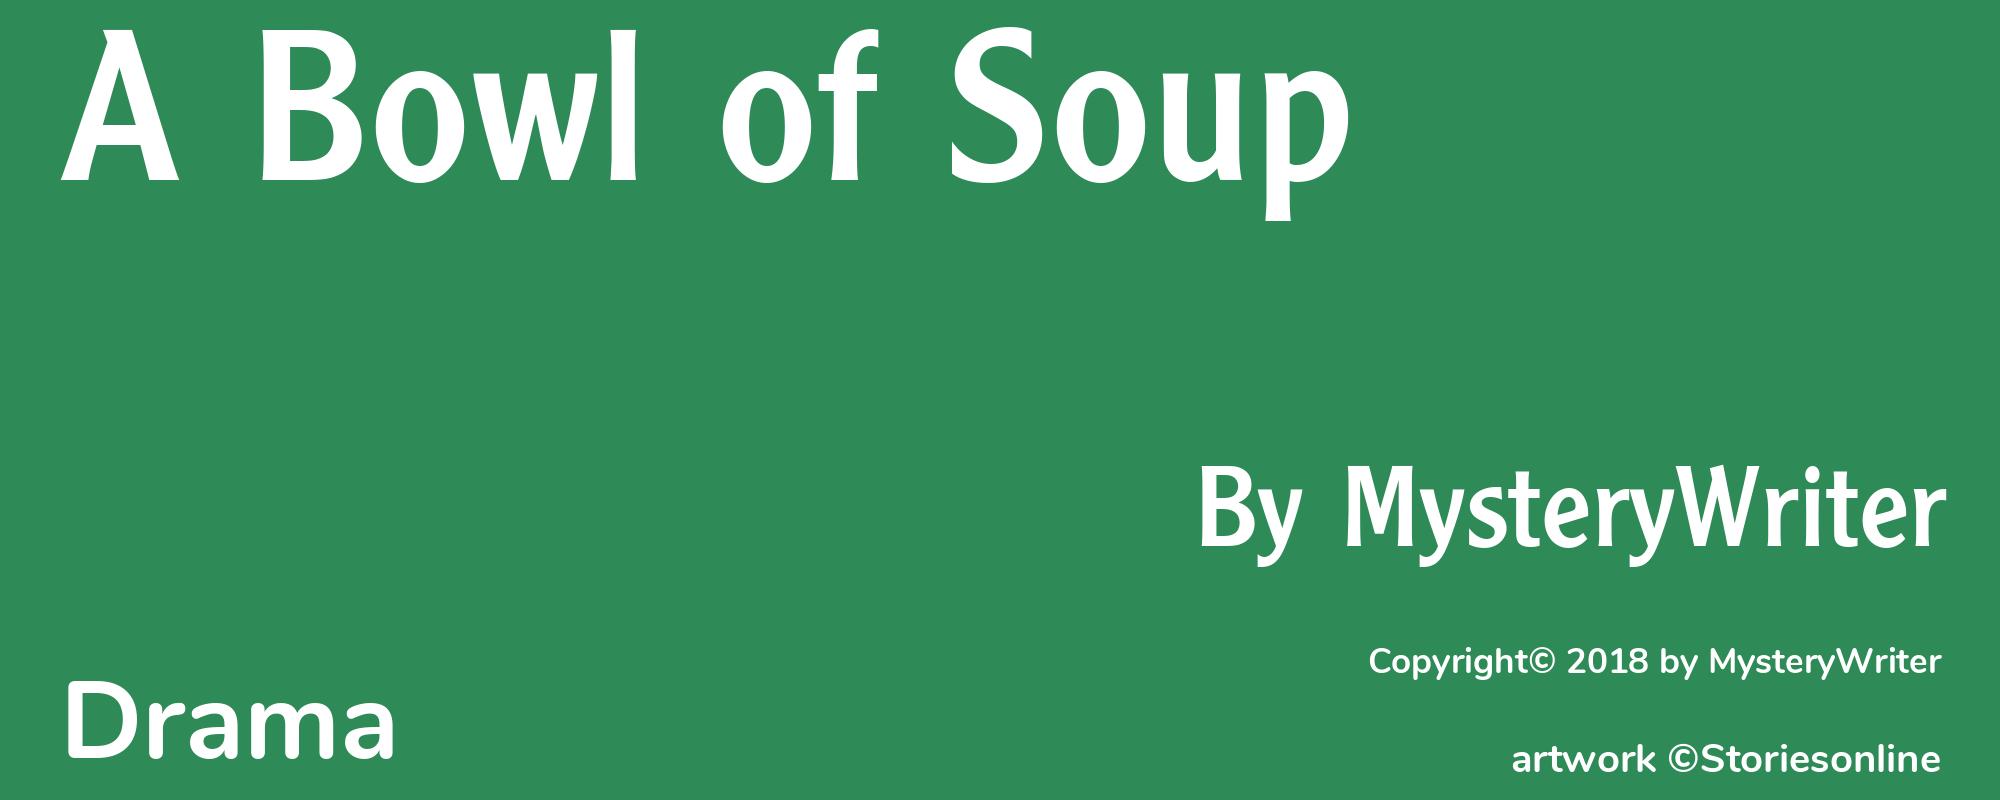 A Bowl of Soup - Cover